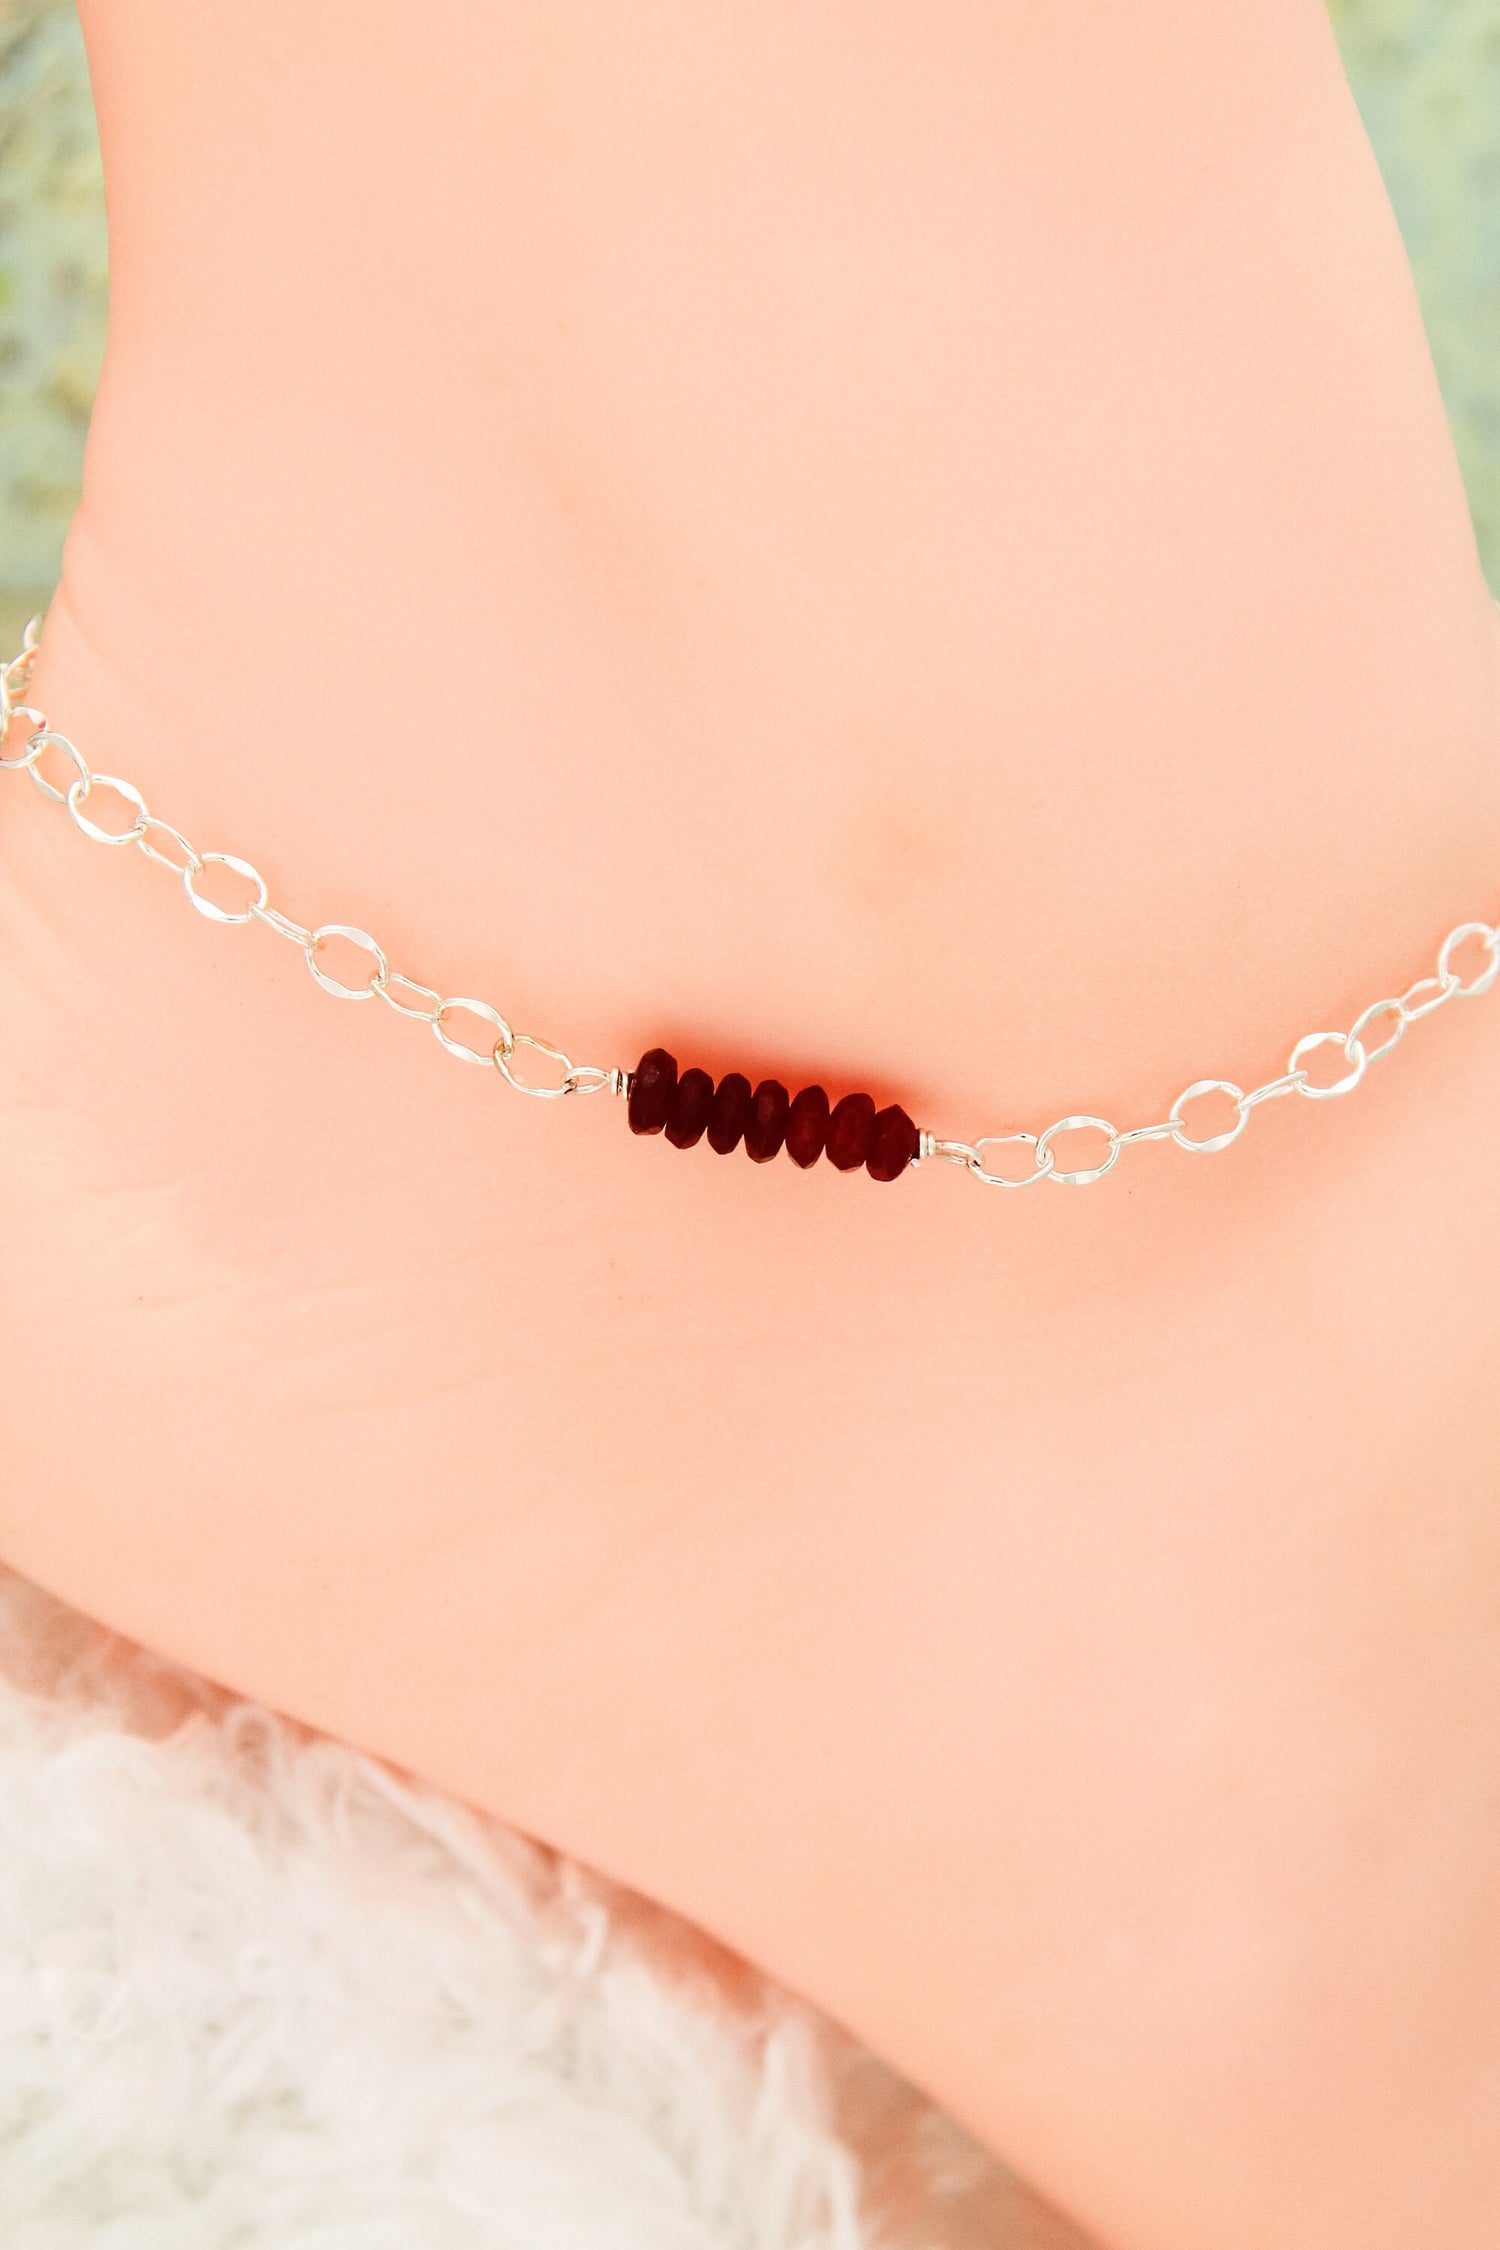 July Birthstone Anklet, July Birthday Gift, Ruby Anklet, Sterling Silver Anklet, Gifts for Her, July Birthday, Birthstone Anklet